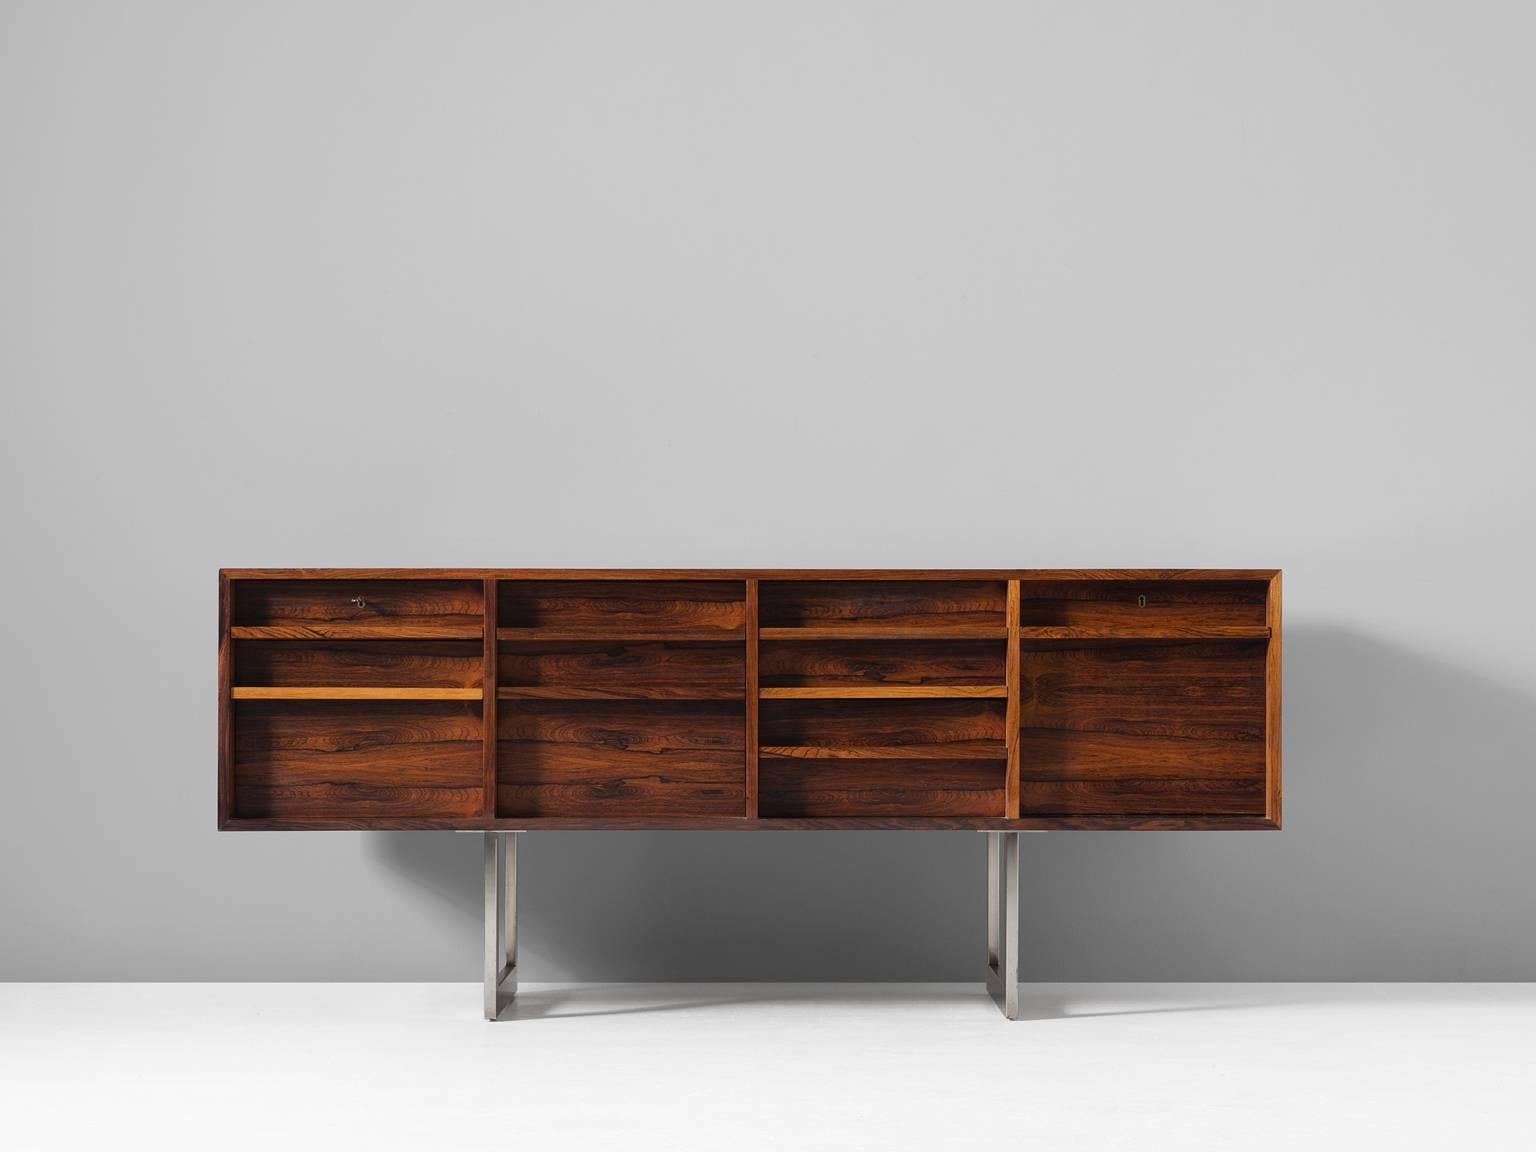 Bodil Kjaer, sideboard model 911, in rosewood and metal, by Denmark, designed 1959, this example manufactured 1960-70s. 

Freestanding sideboard in rosewood by Danish designer Bodil Kjaer. Absolute stunning credenza. This cabinet shows an